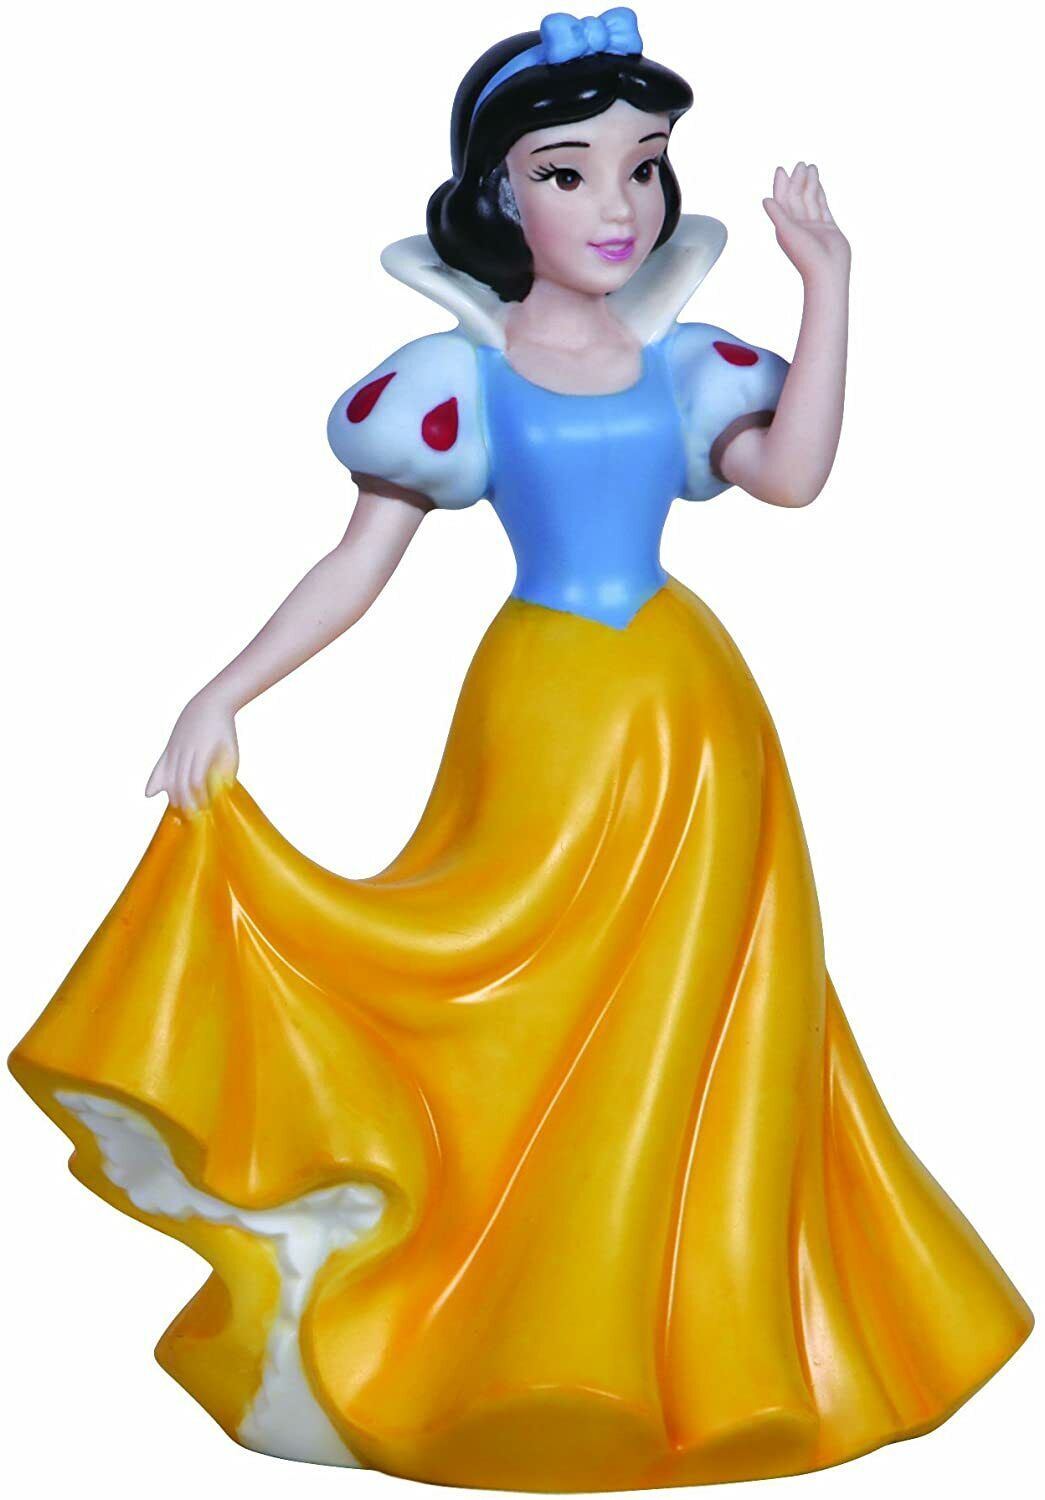 Precious Moments Snow White The Fairest of them All Figurine